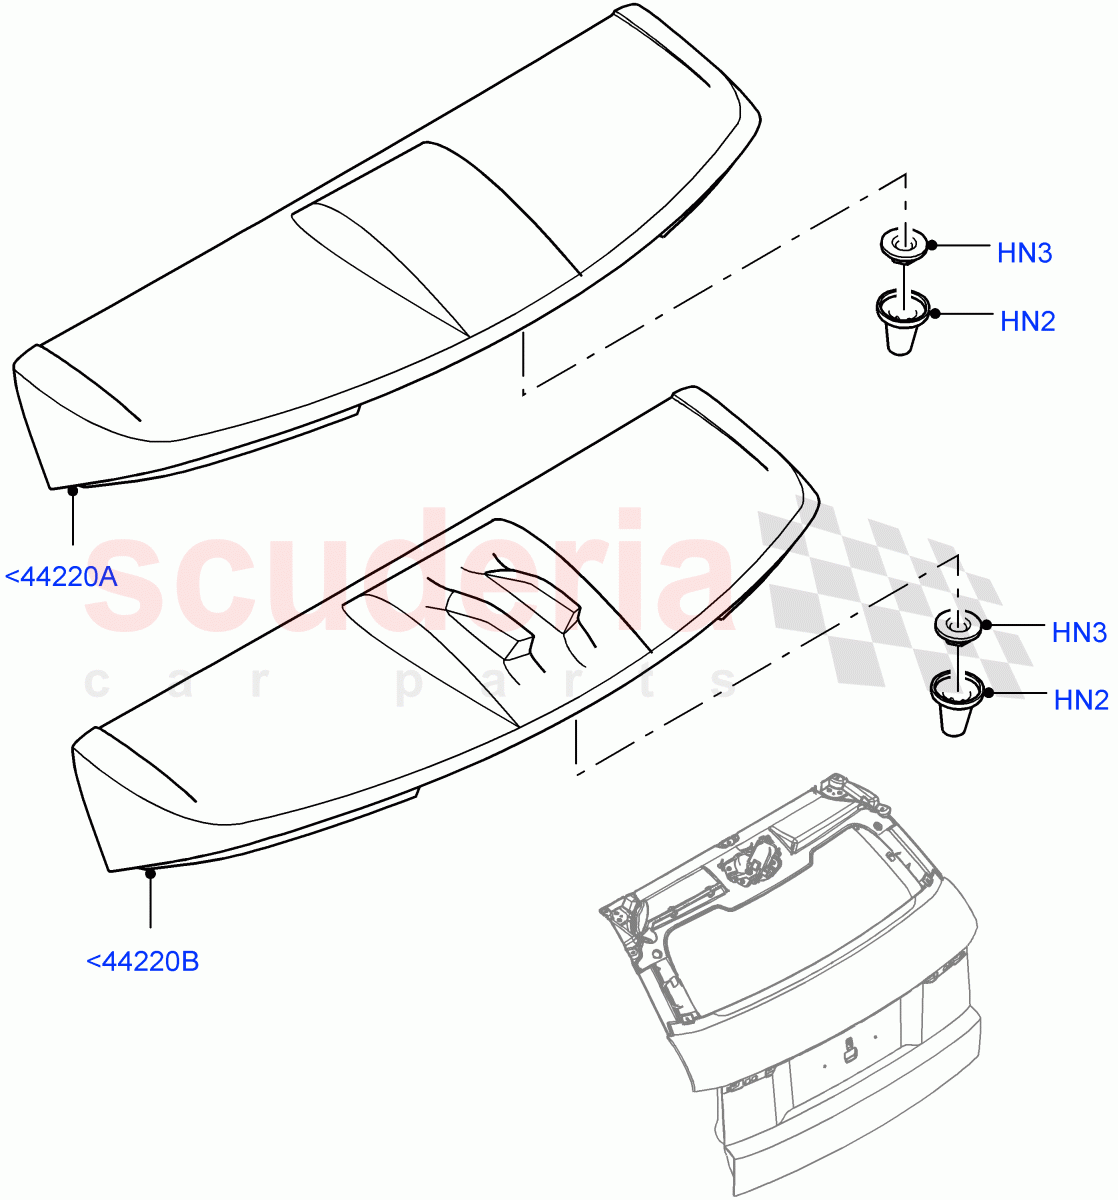 Spoiler And Related Parts(Itatiaia (Brazil))((V)FROMGT000001) of Land Rover Land Rover Range Rover Evoque (2012-2018) [2.0 Turbo Petrol AJ200P]